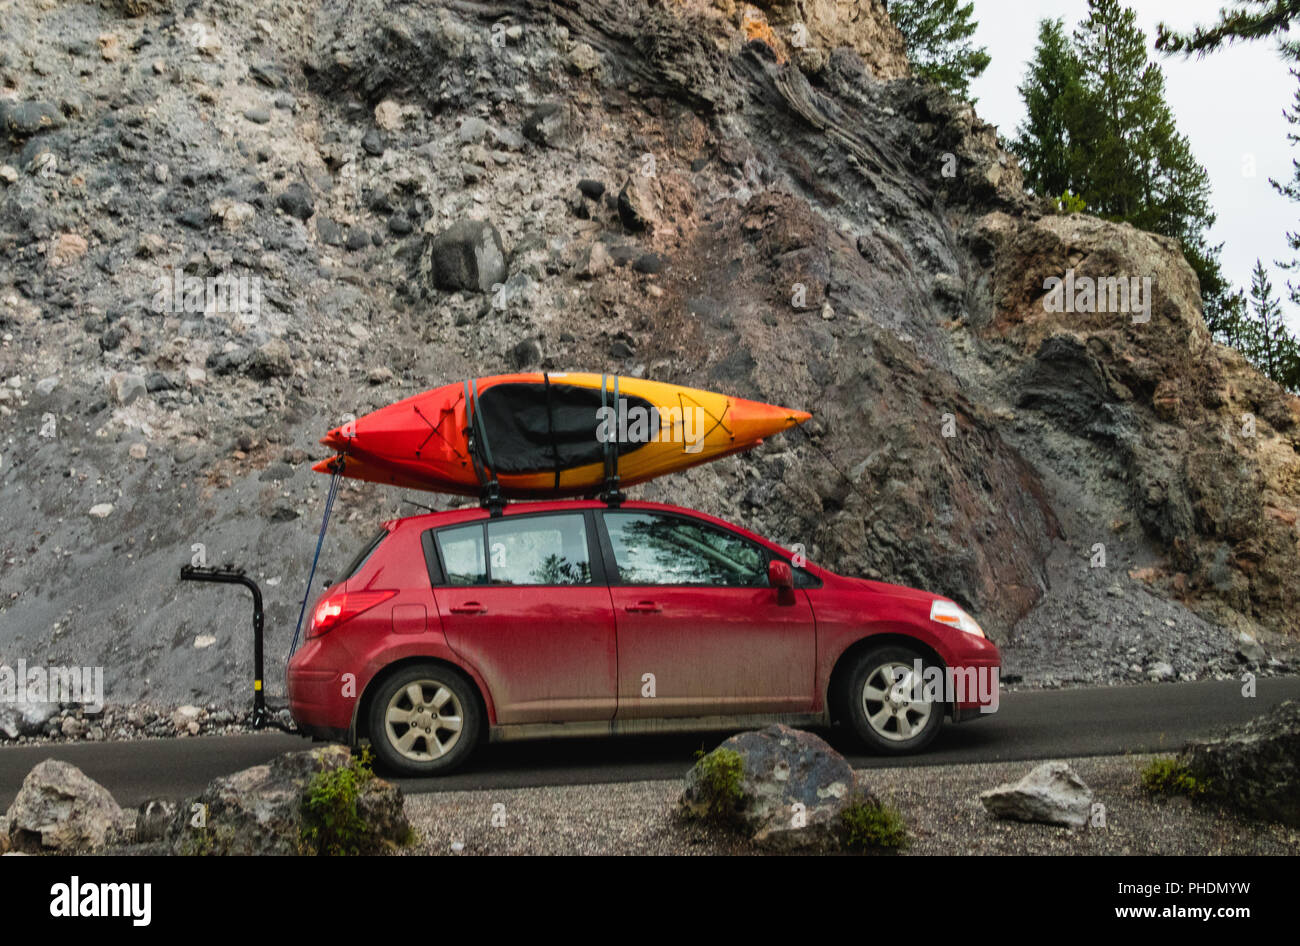 Dirty Red car with kayaks - vacation getaway road trip Stock Photo